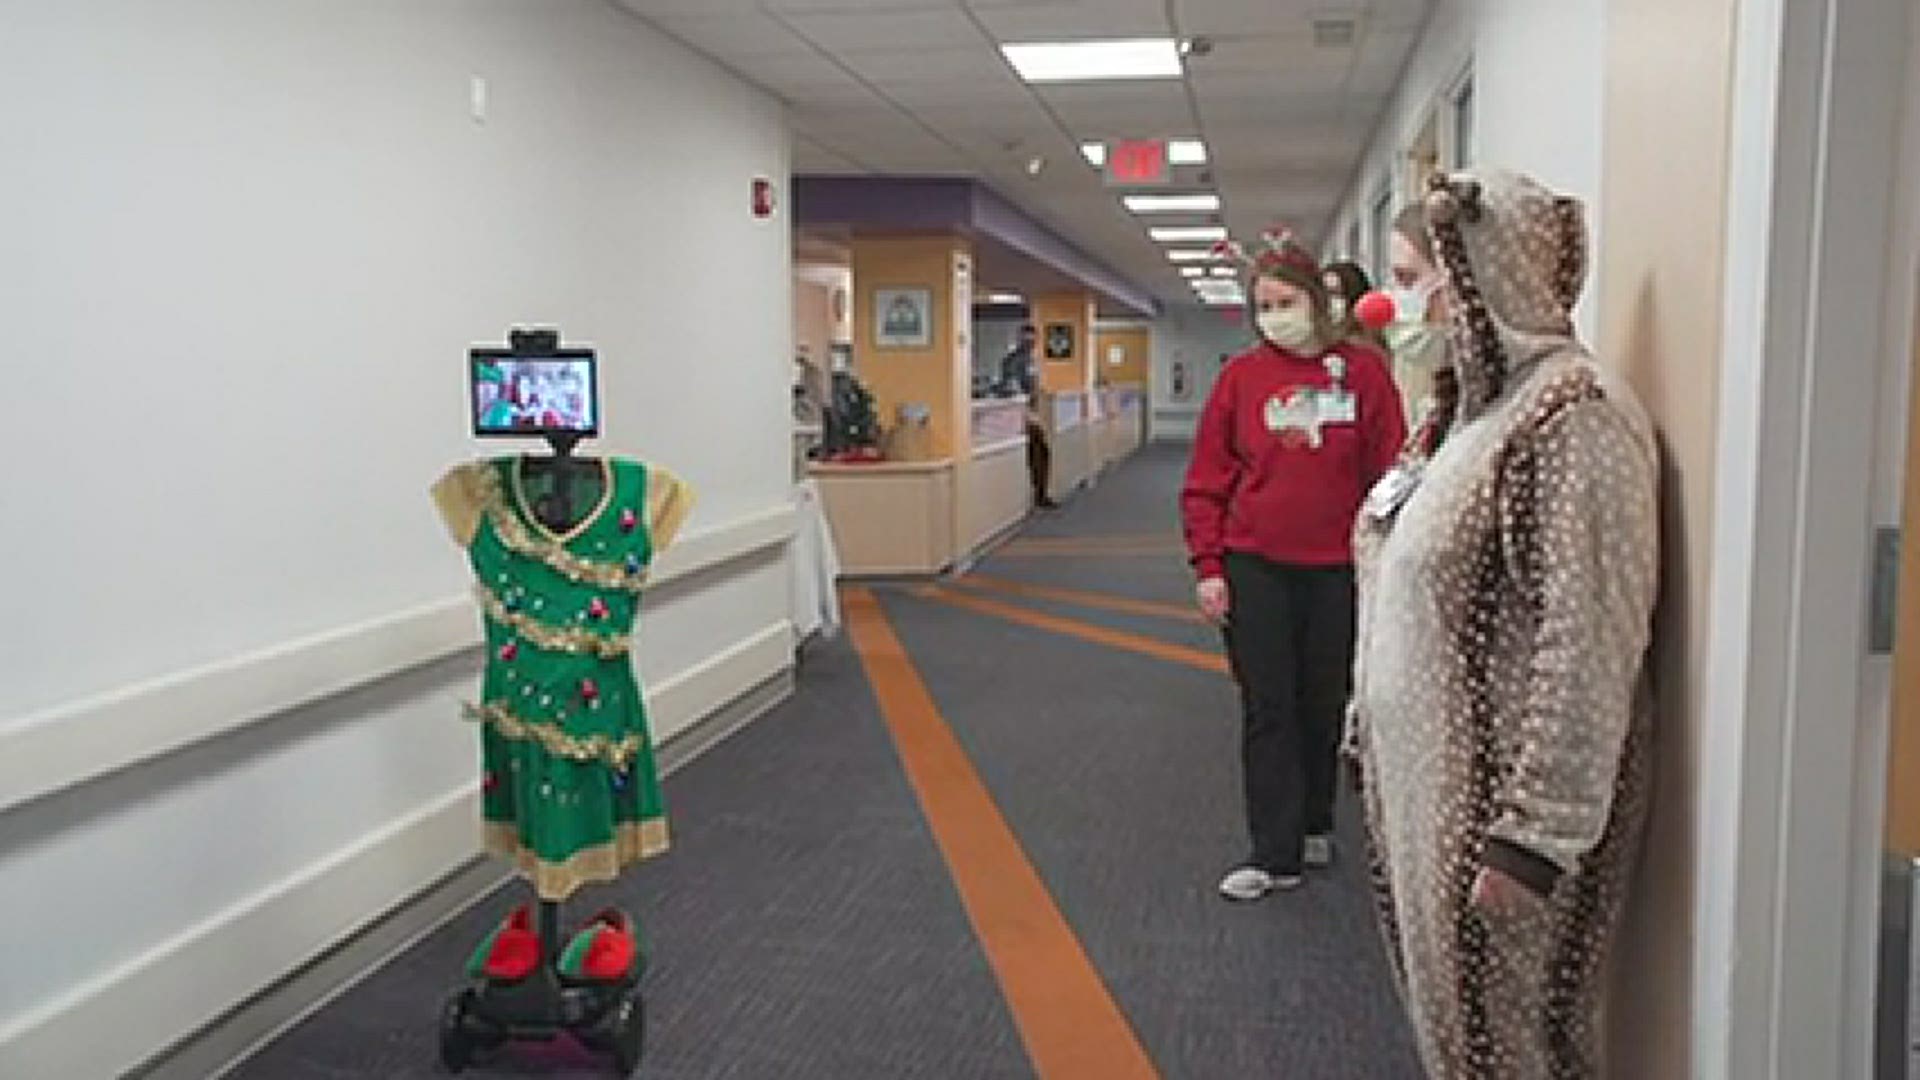 Santa made a virtual visit to children at St. Louis Children's Hospital on Tuesday